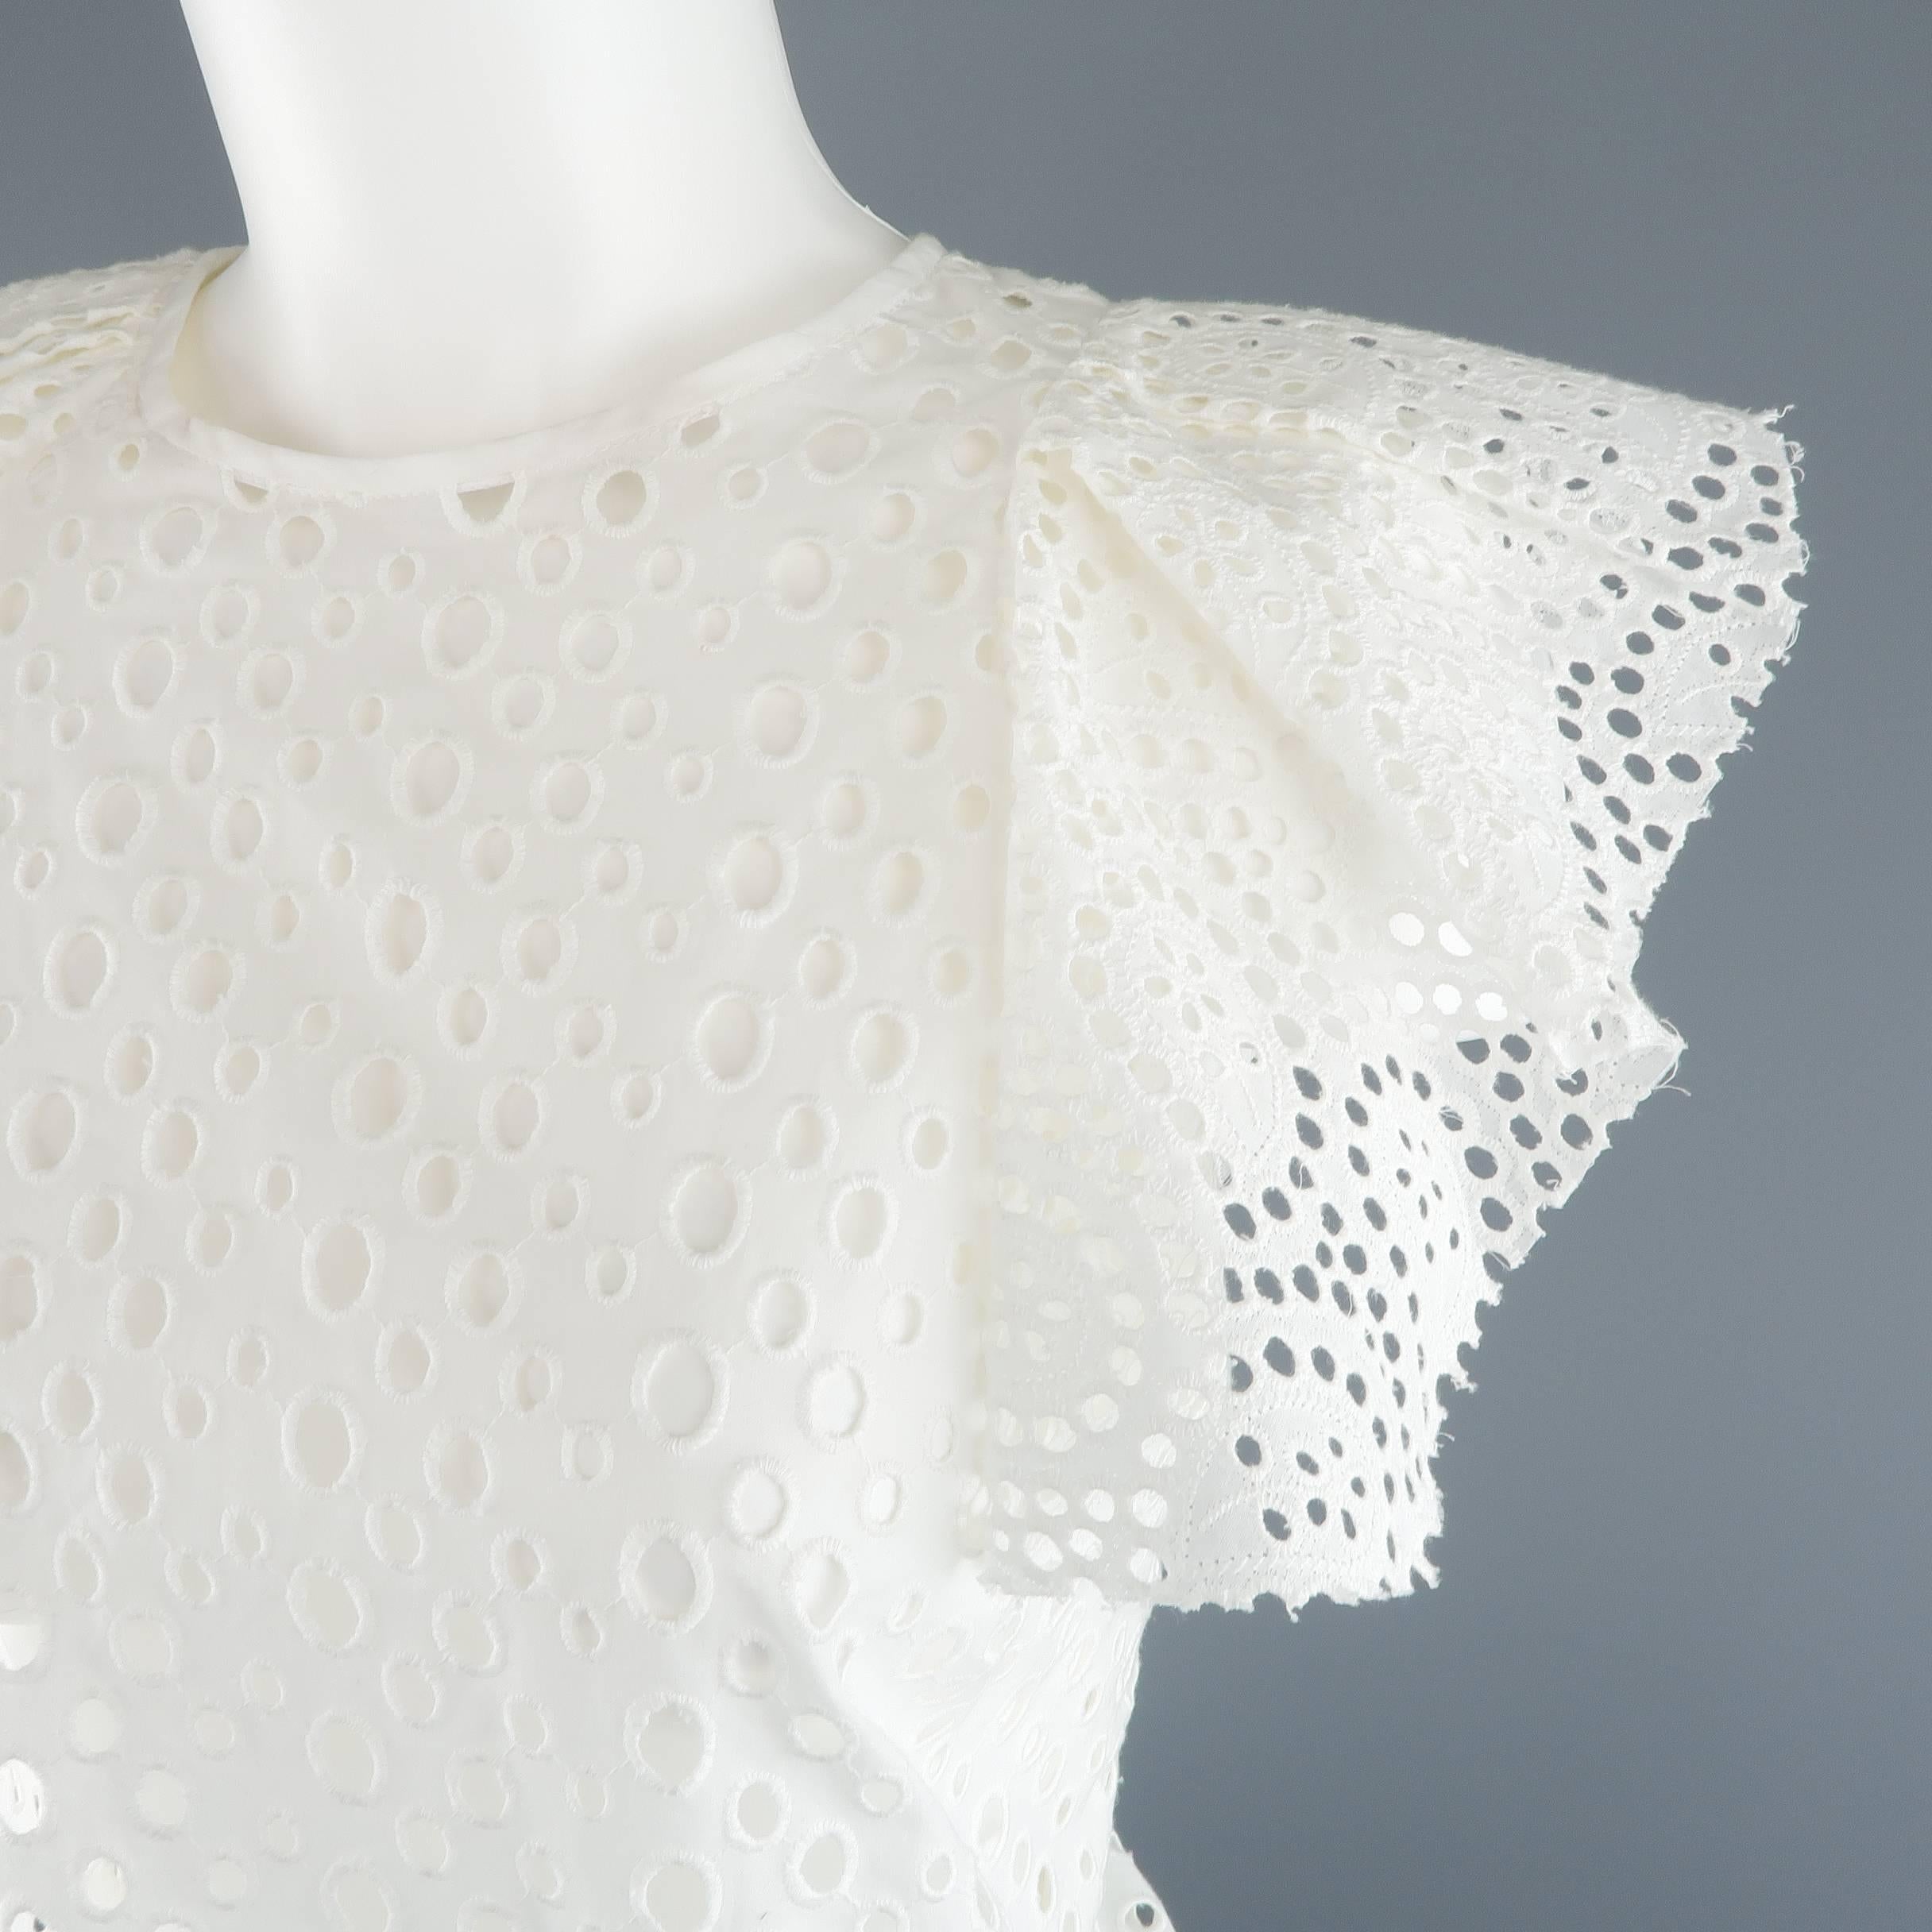 ISABEL MARANT spring top comes in a polka dot cut out perforated cotton lace and features an oversized silhouette, round neckline, and asymmetrical pleated ruffle sleeves. Made in Poland.
 
Excellent Pre-Owned Condition.
Marked: (no size)
